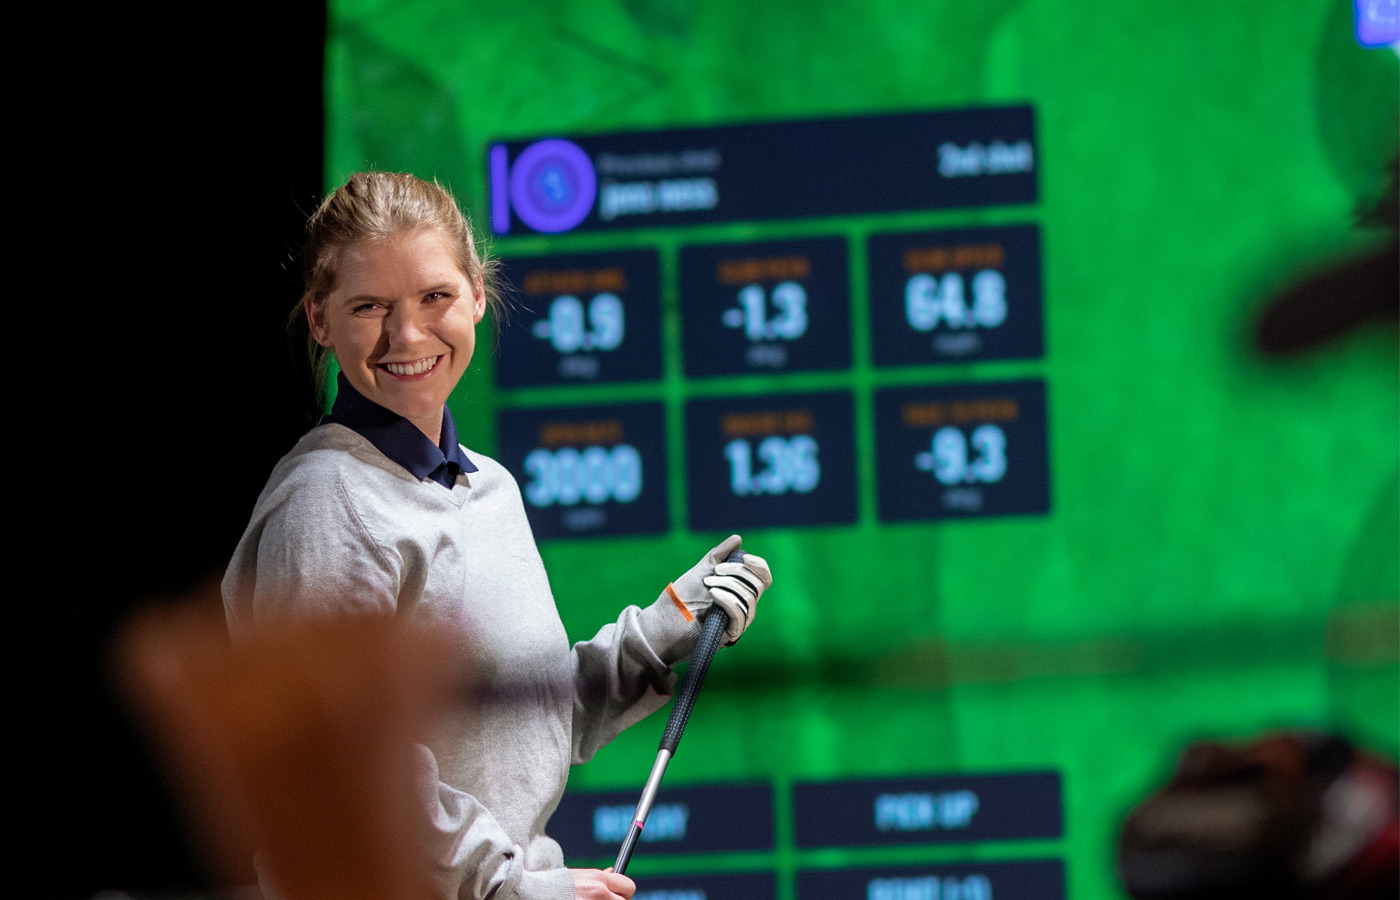 Smiling lady holding golf club in front of golf screen